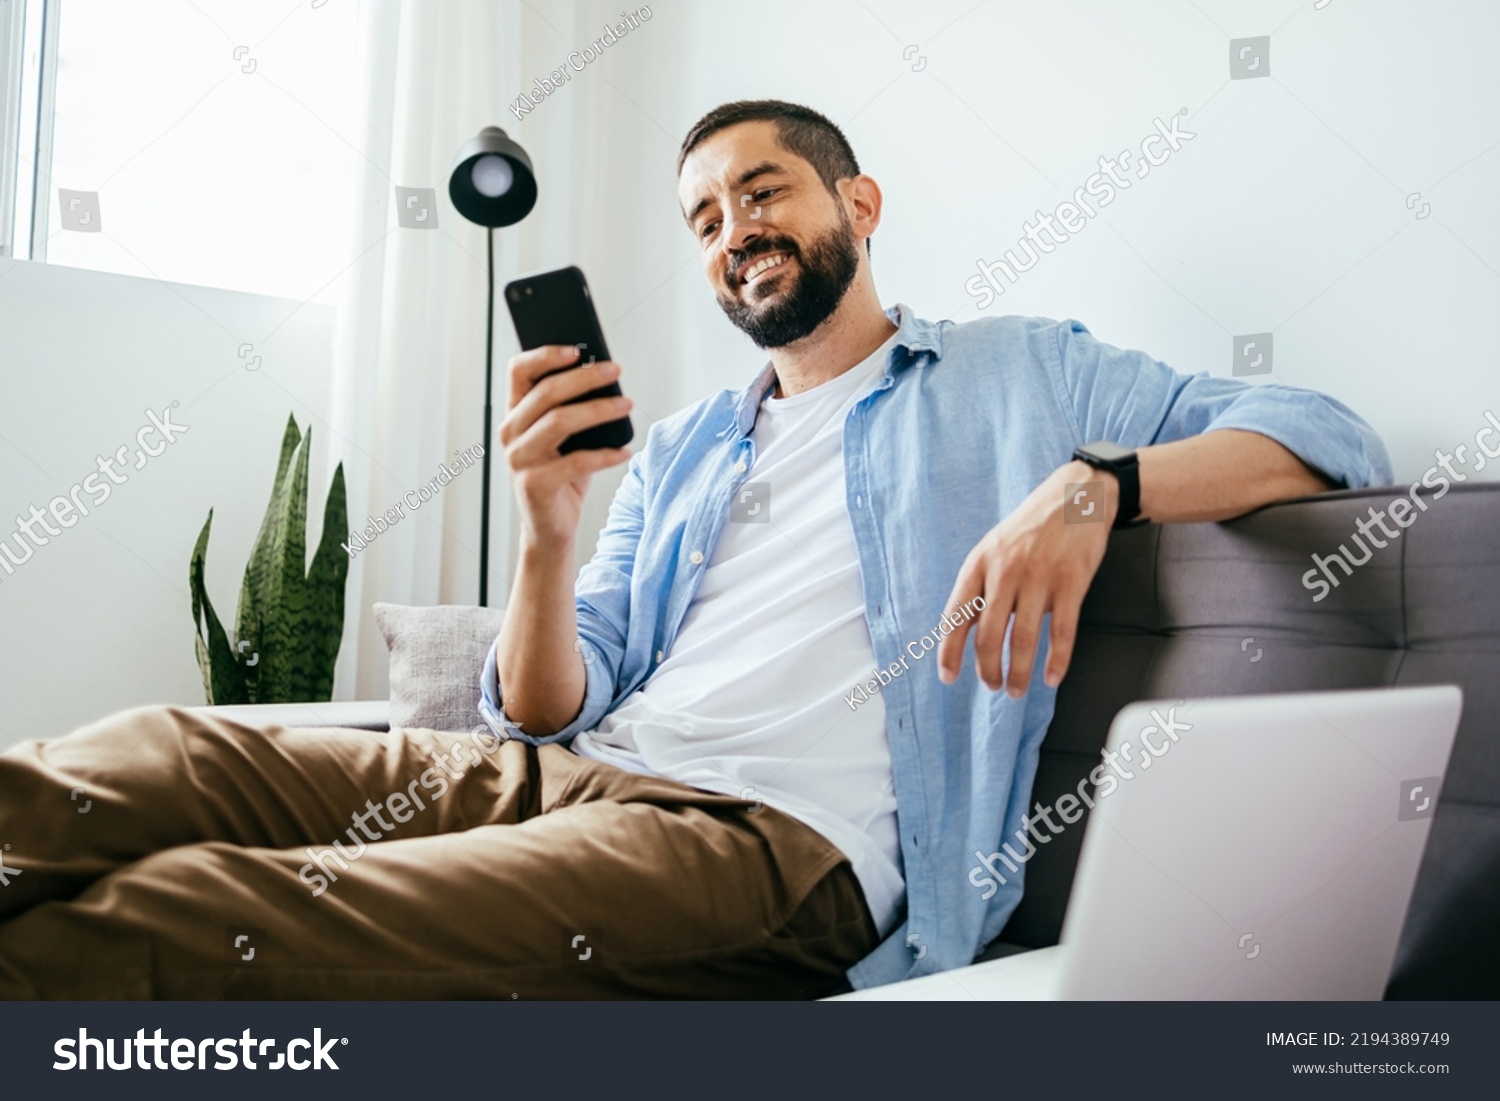 Smiling man sitting on couch at home using laptop and cell phone #2194389749